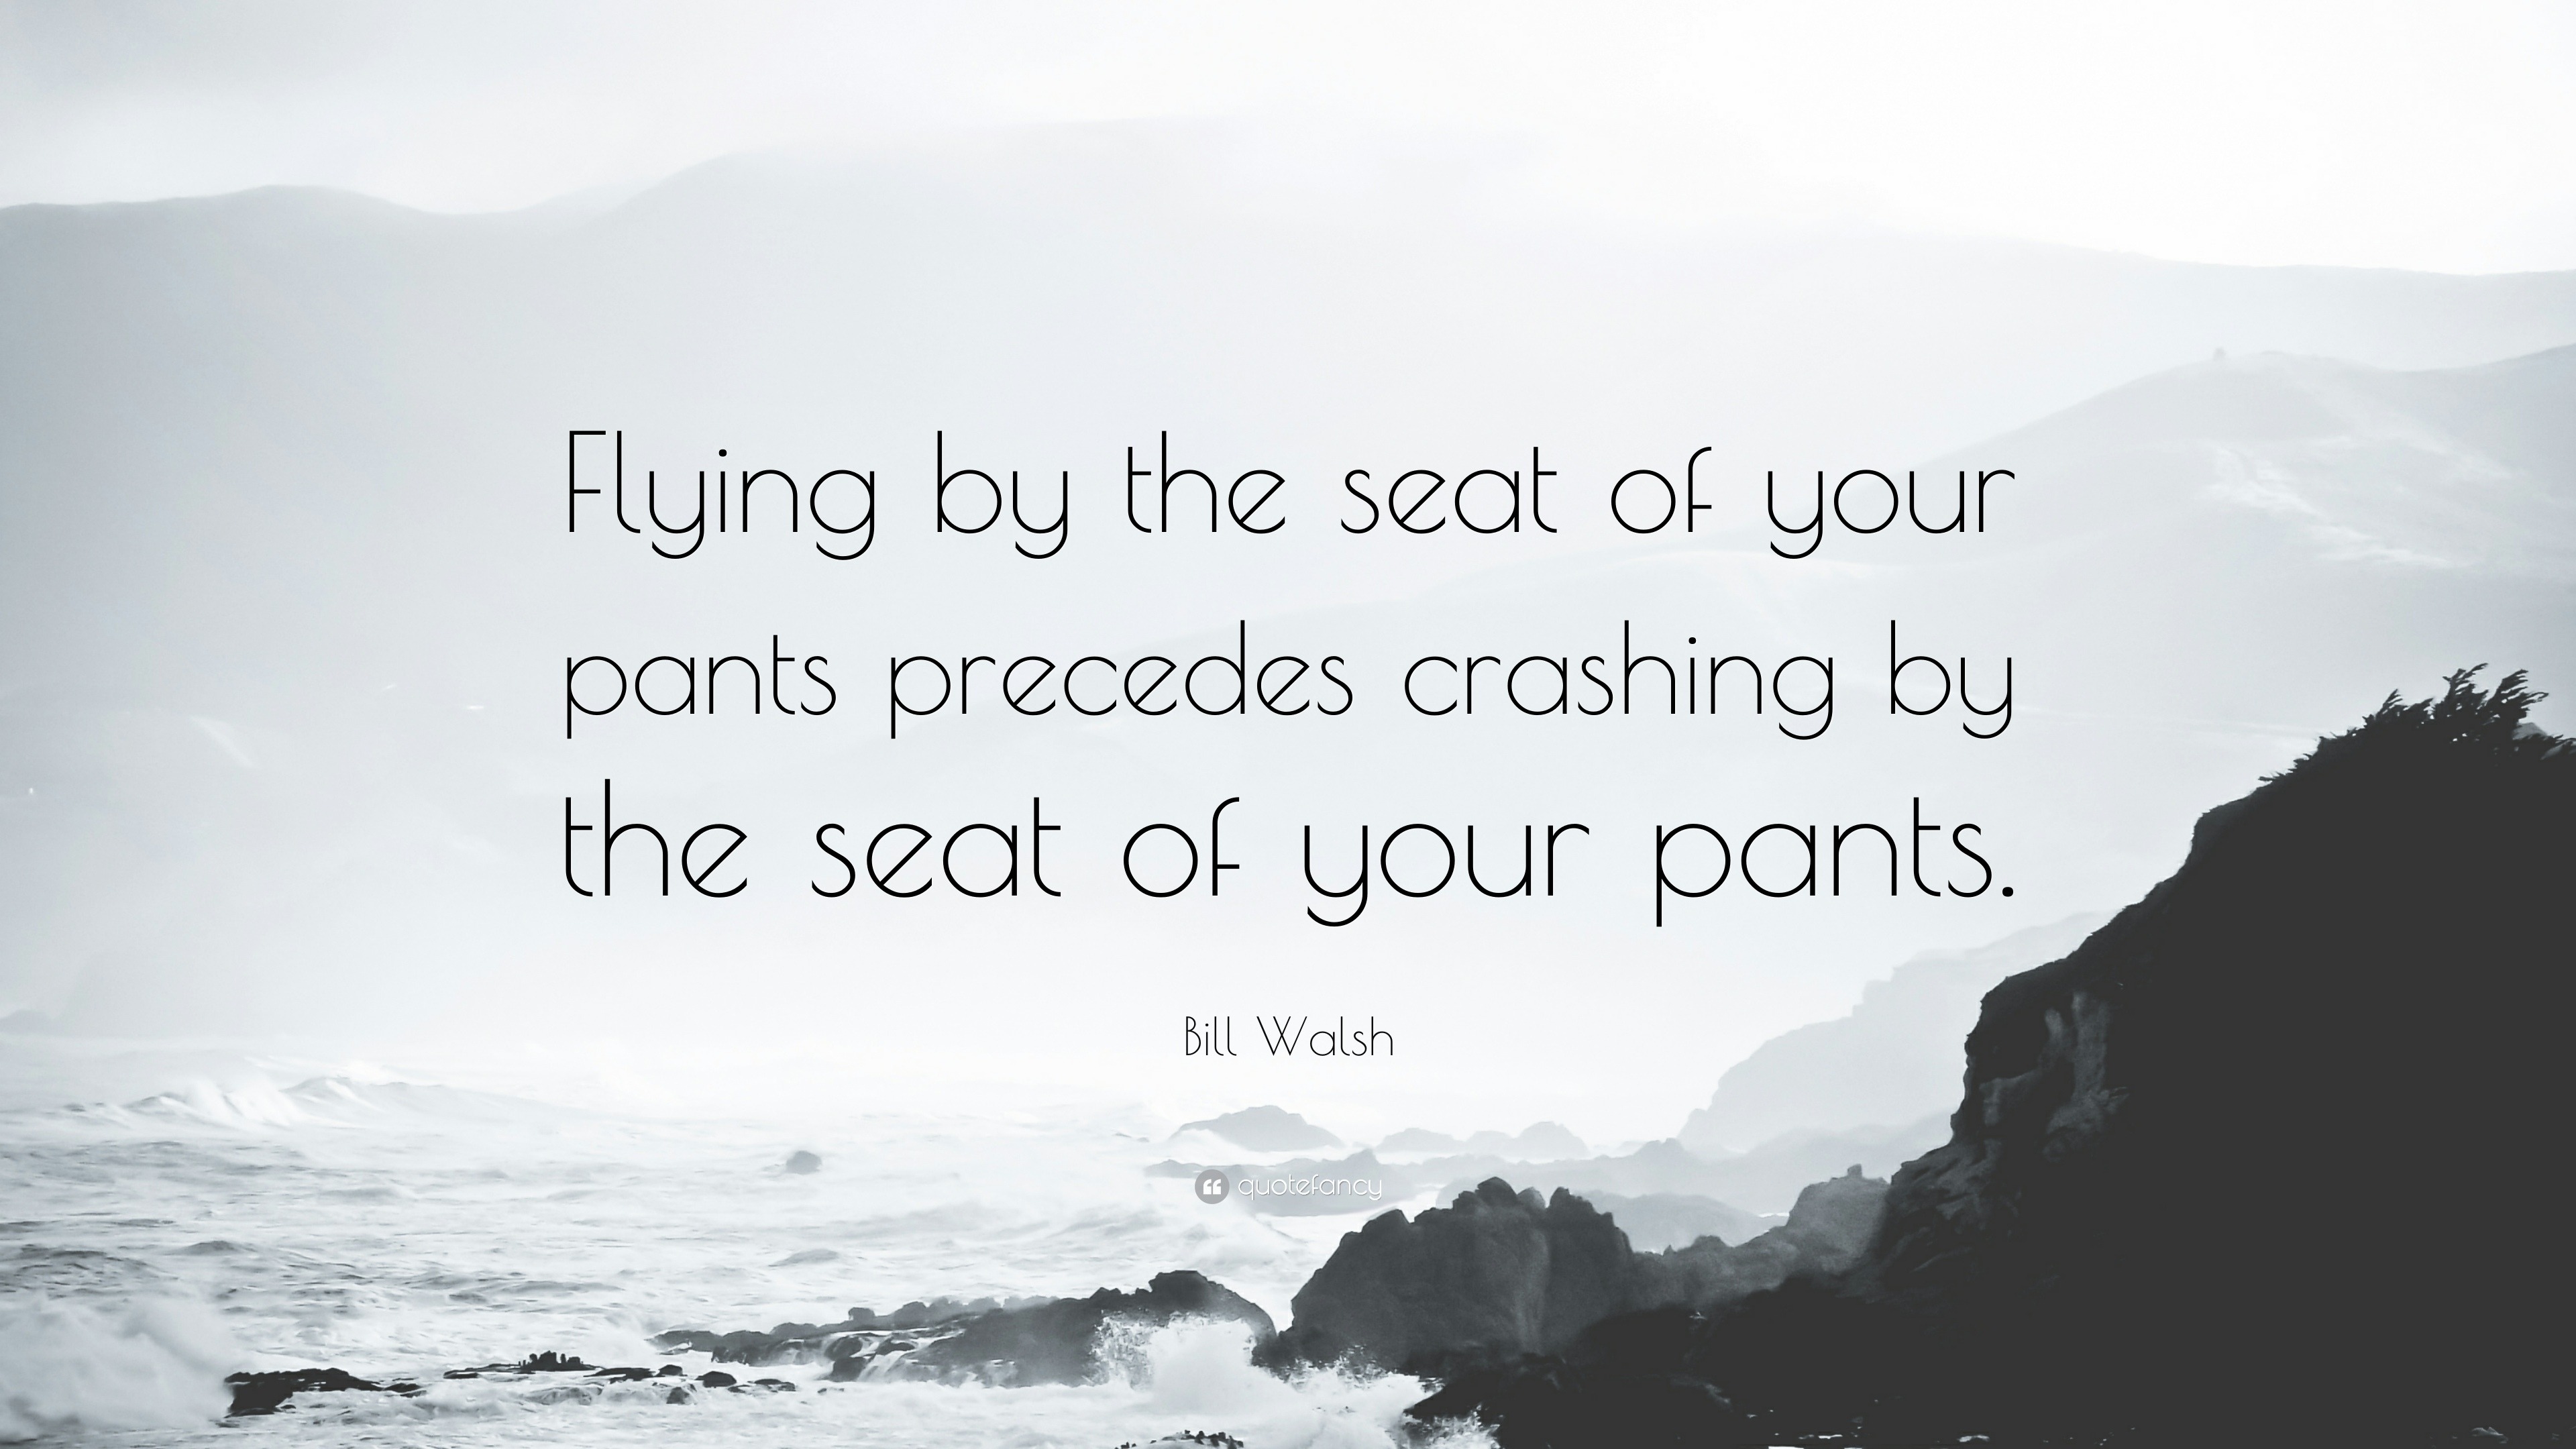 Flying by the seat of my pants  Funny quotes Inspirational quotes  Inspirational quotes motivation